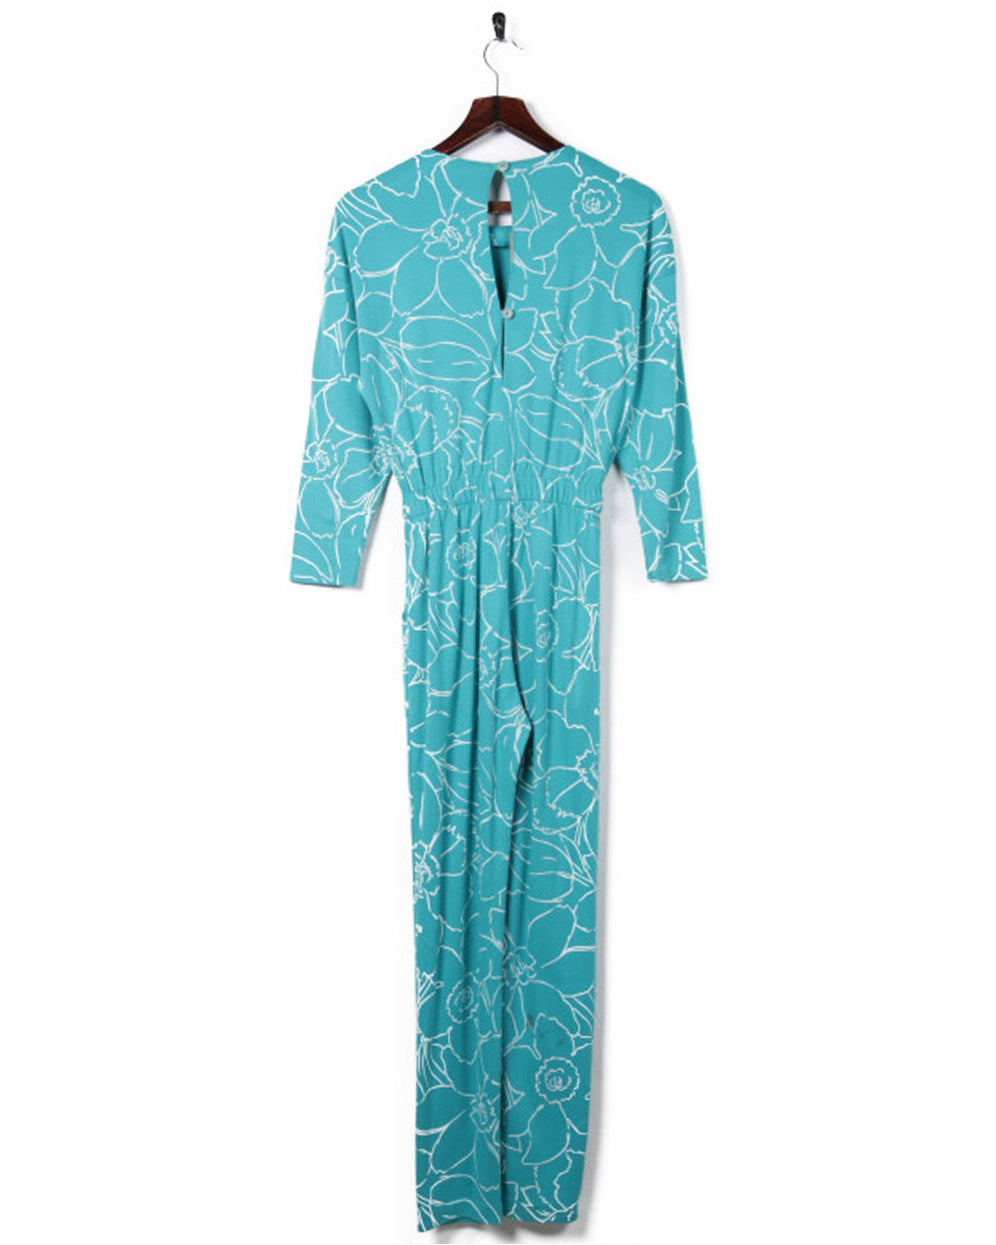 80s Turquoise Long Sleeve Floral Jumpsuit - S